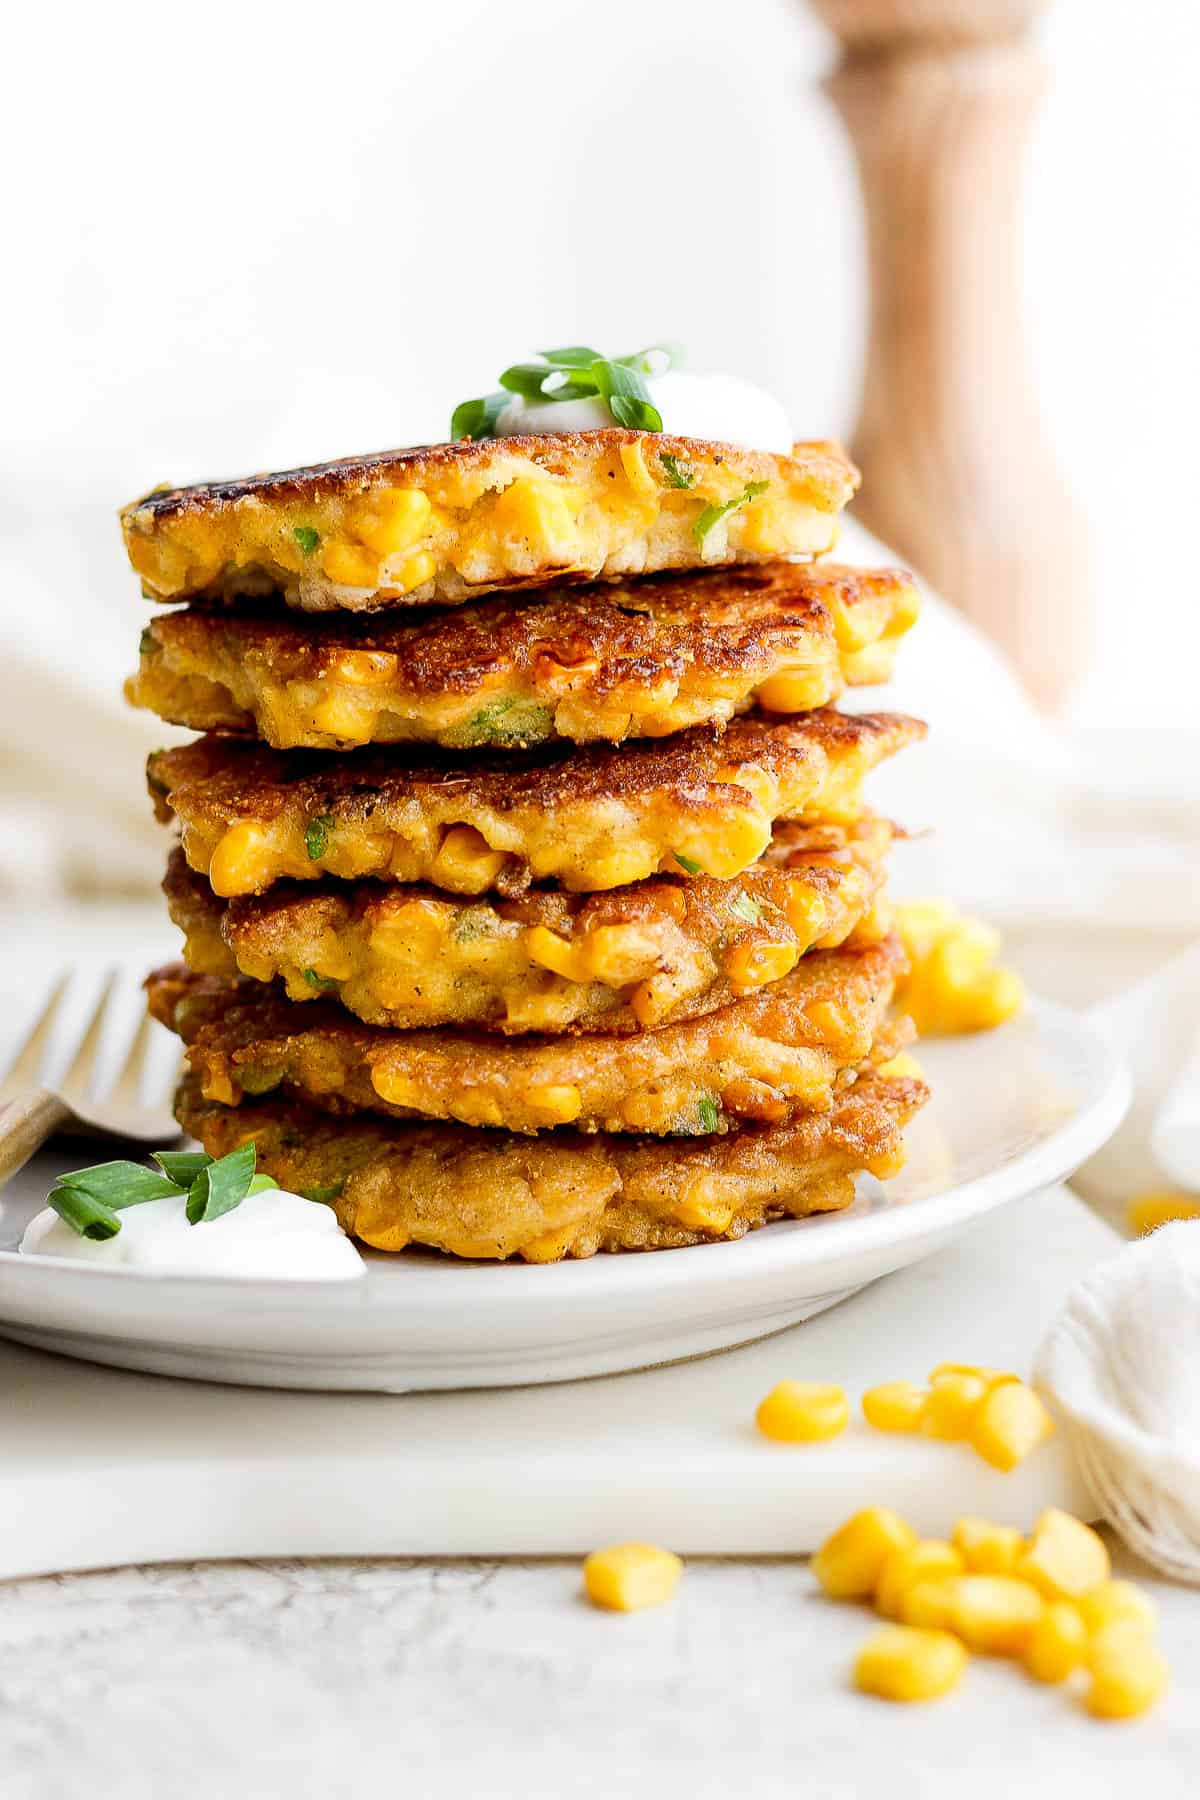 Six corn fritters stacked on top of each other on a plate.